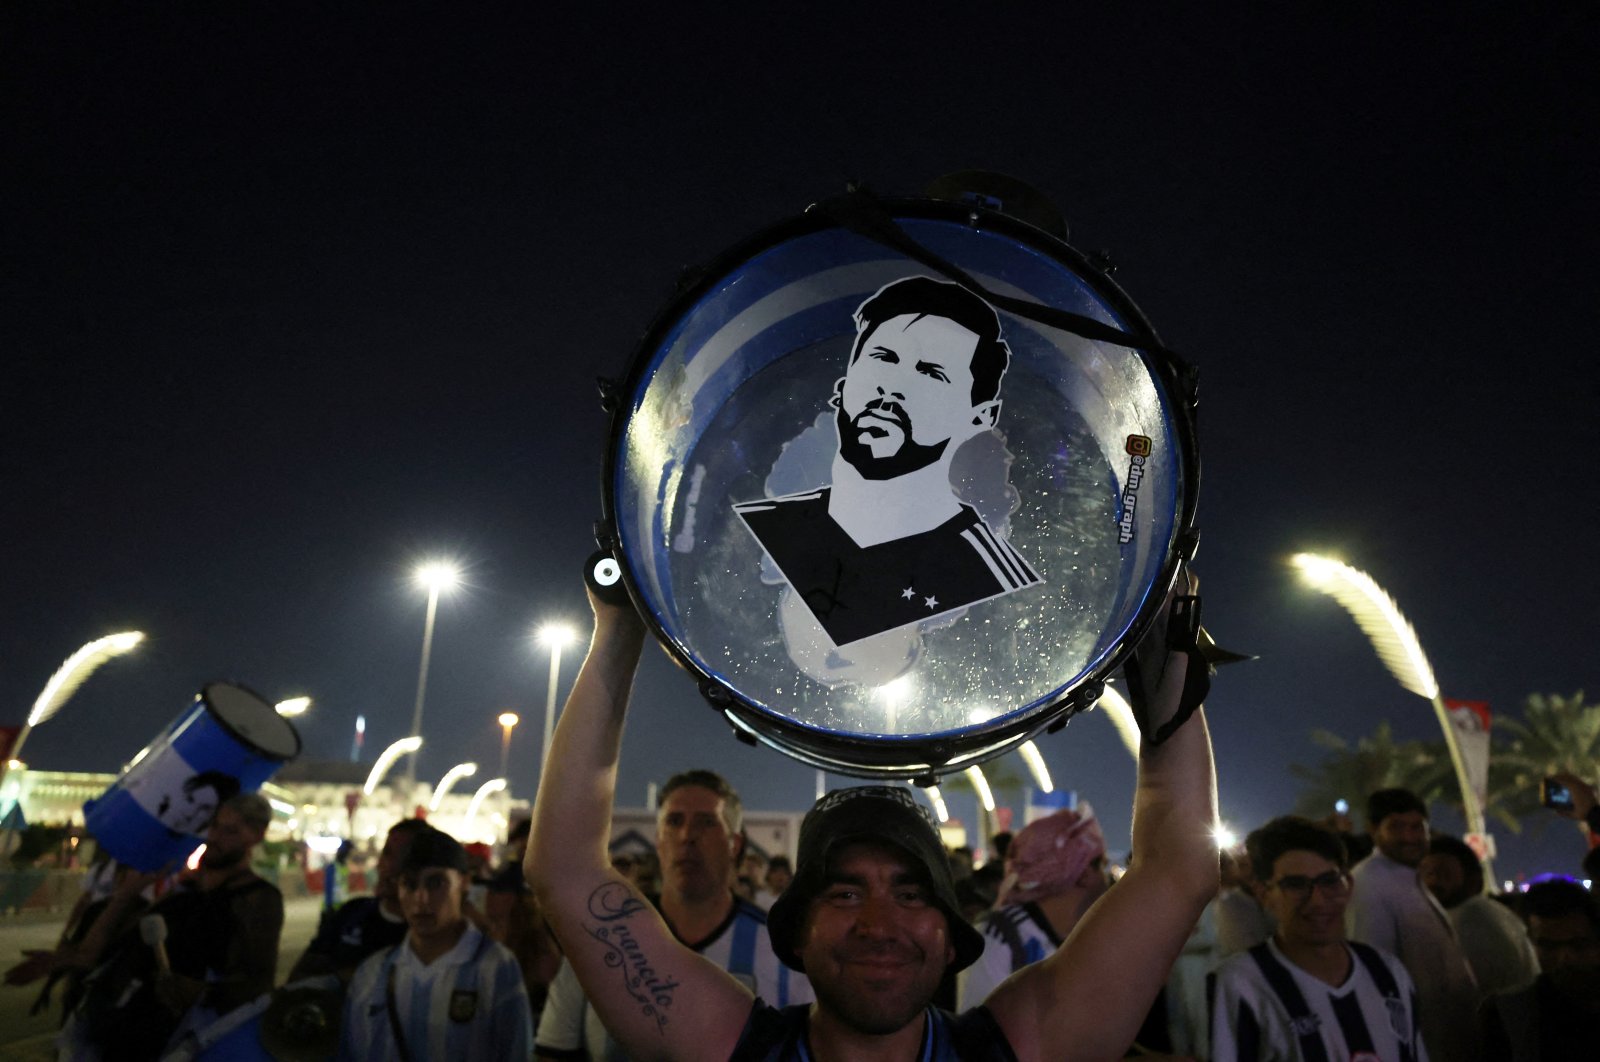 An Argentina fan holds up his drum with an image of Lionel Messi on it during the World Cup, Doha, Qatar, Nov. 25, 2022. (Reuters Photo)